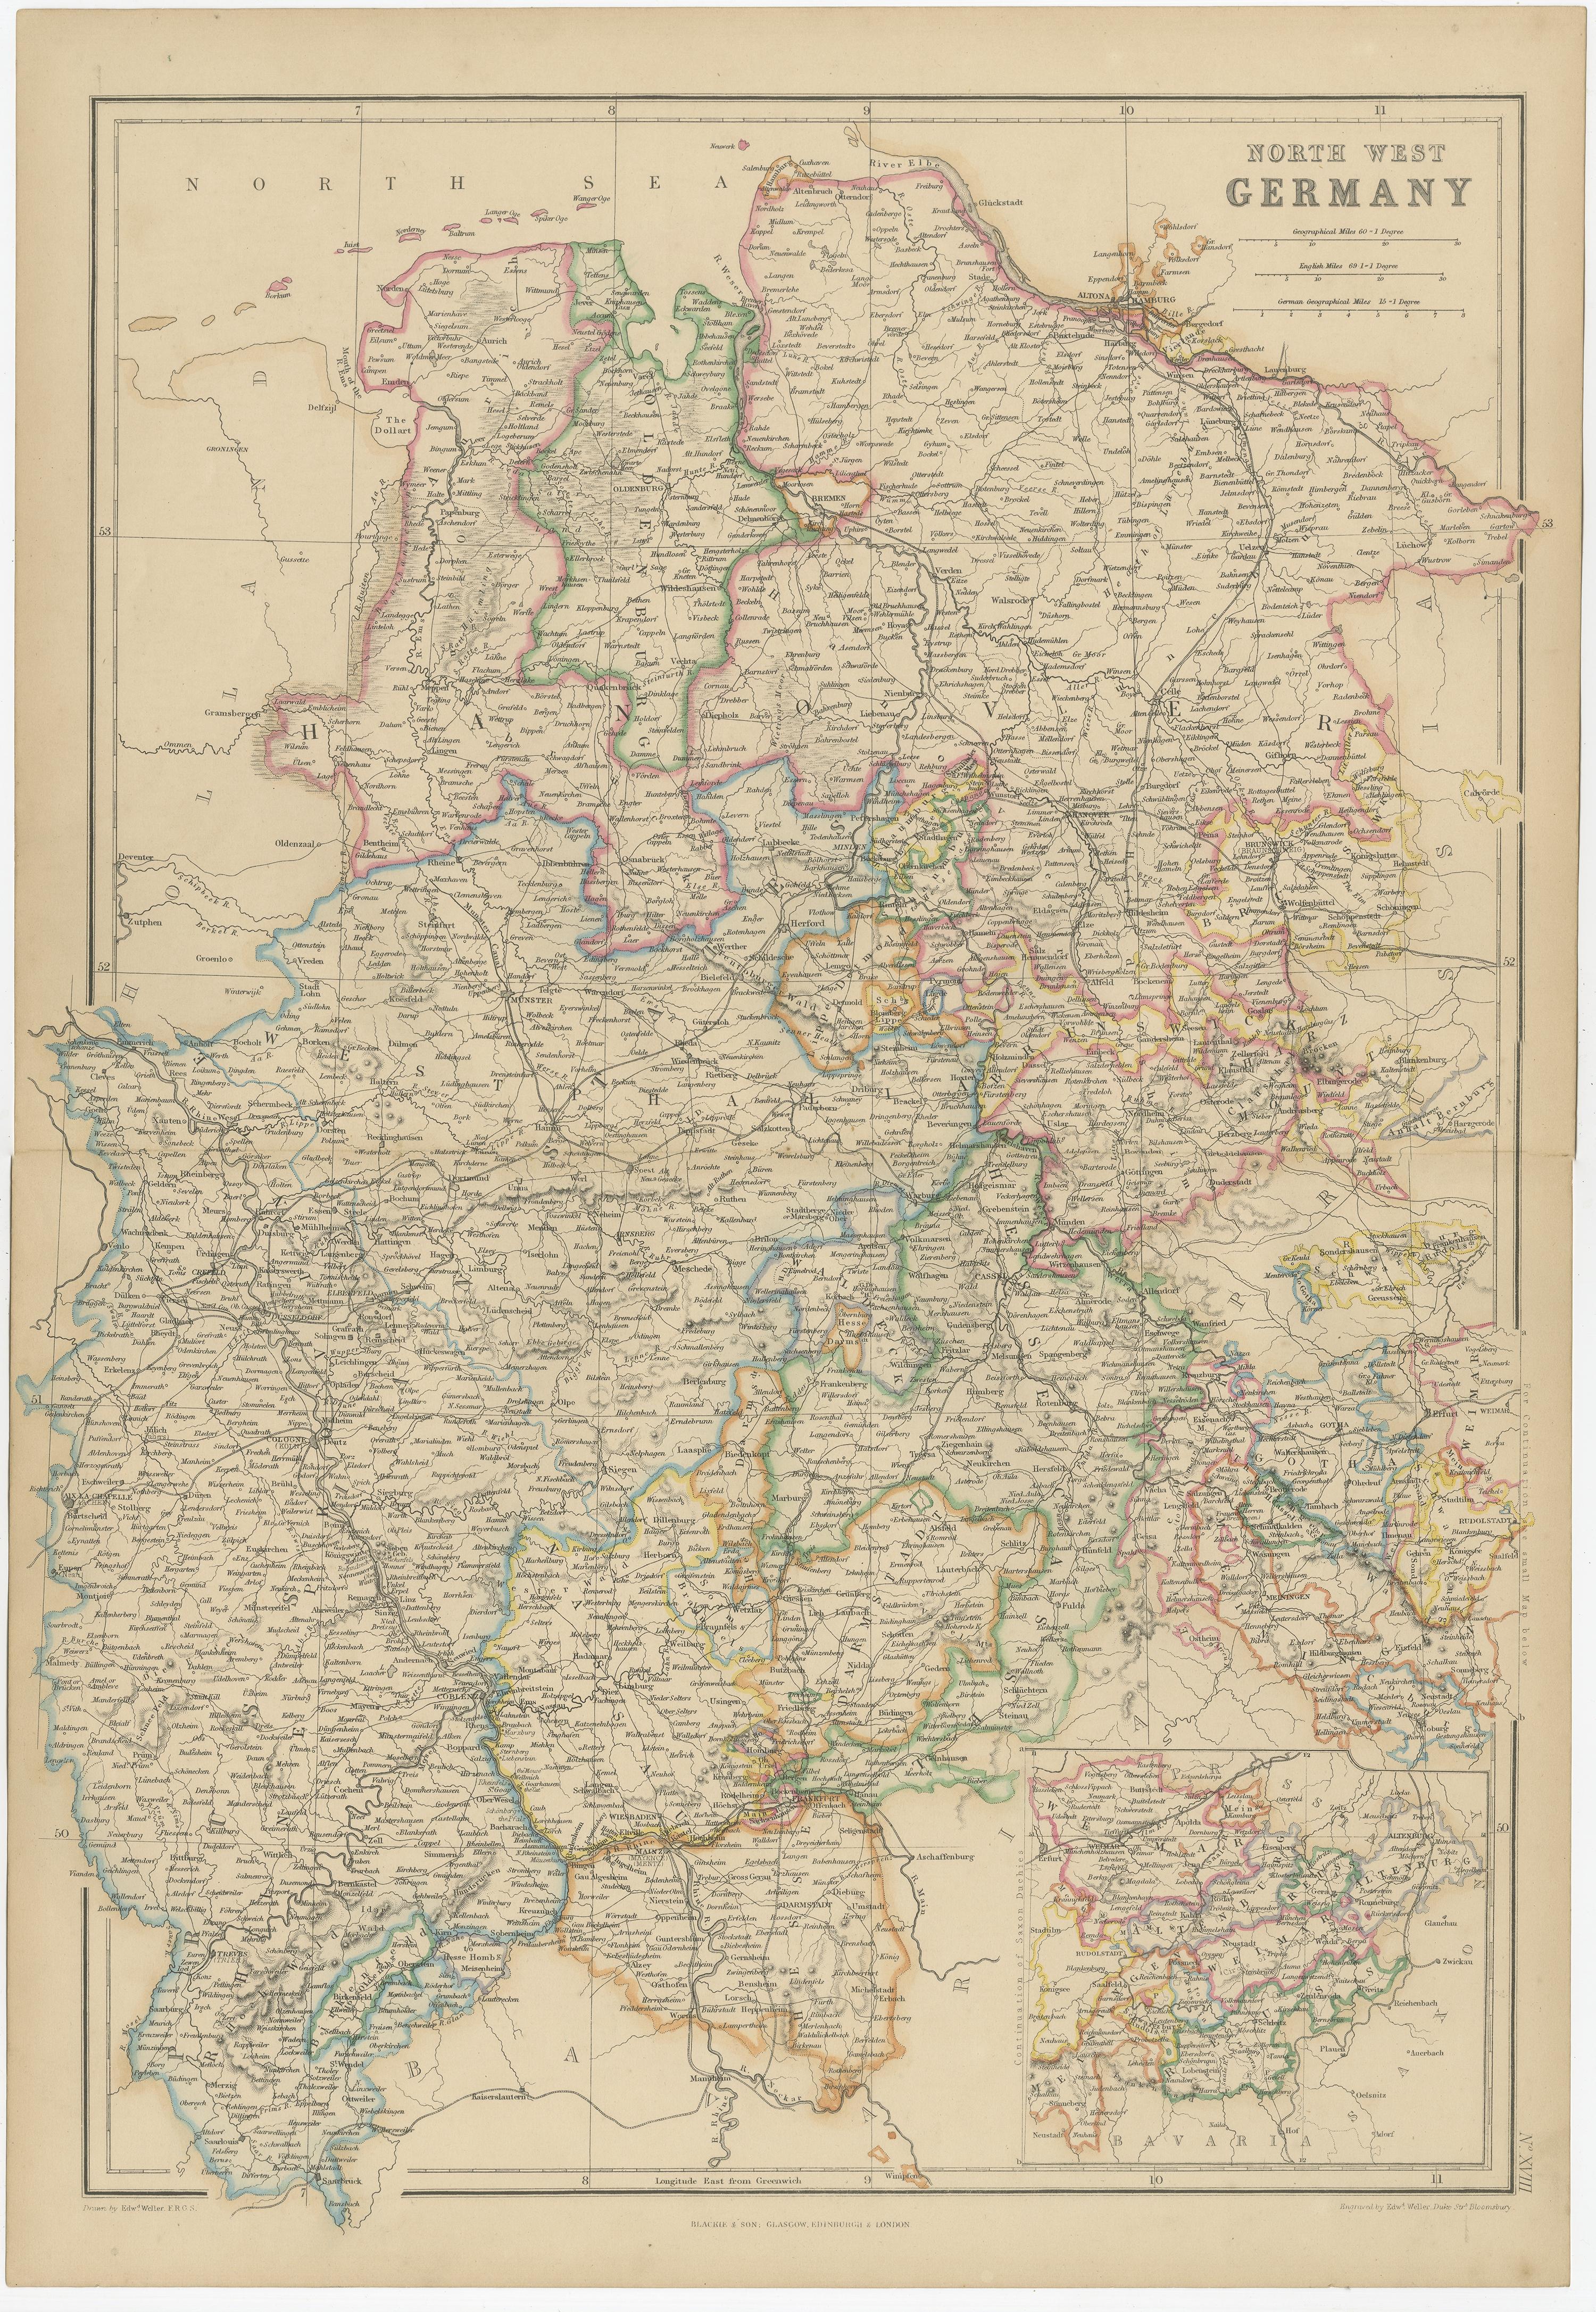 north west germany map